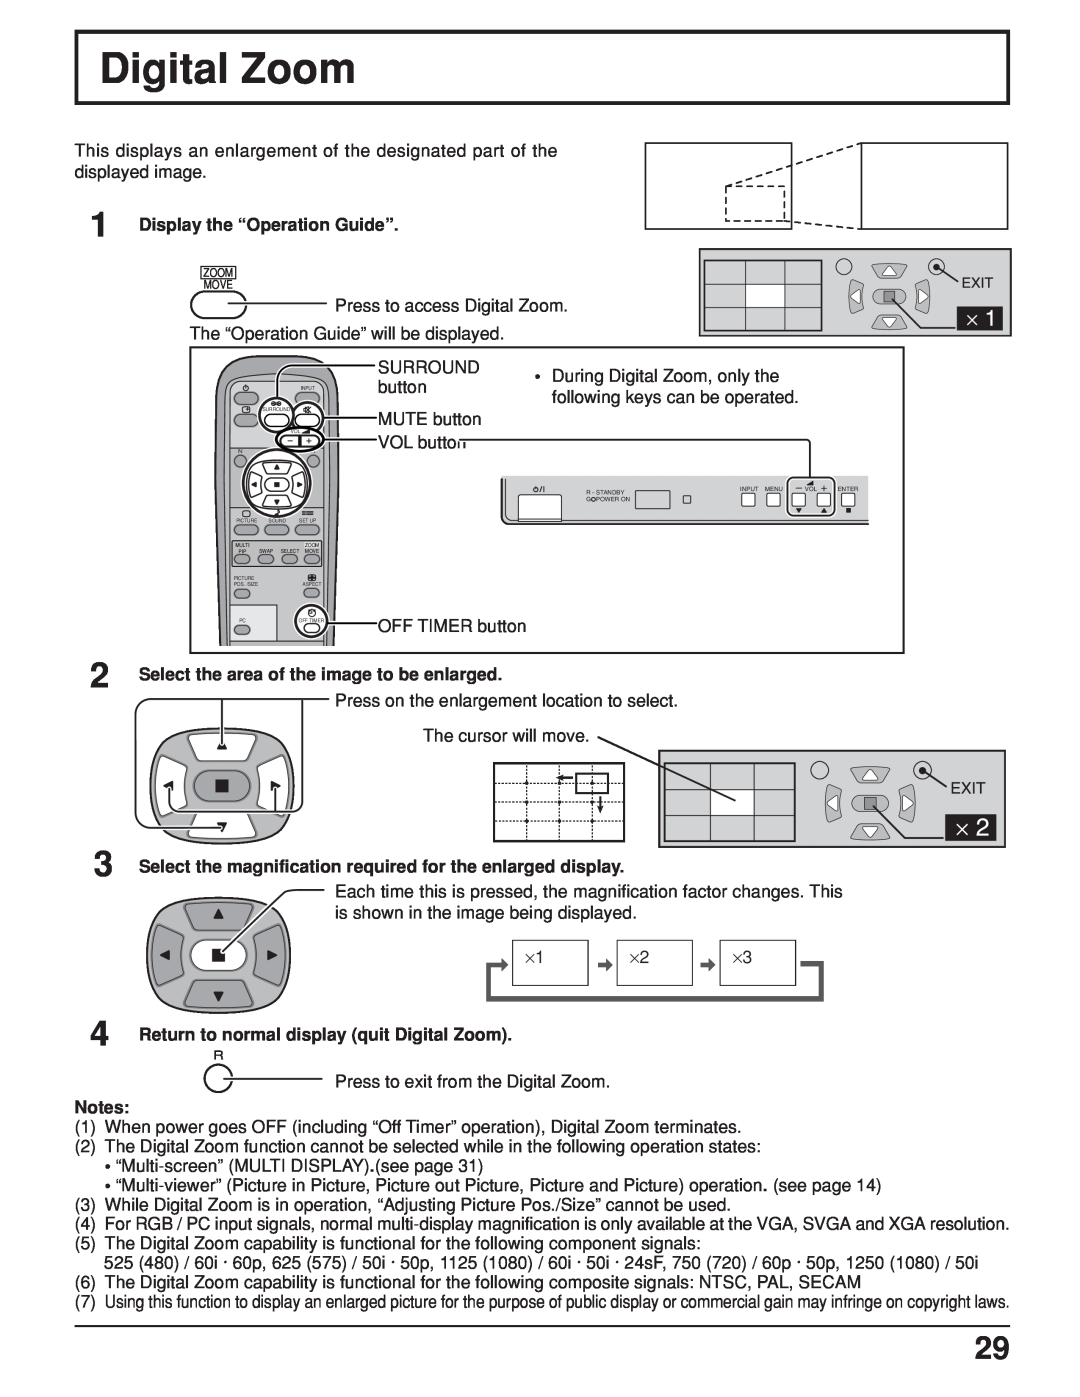 JVC GD V502U, GD-V422U manual Digital Zoom, Display the “Operation Guide”, Select the area of the image to be enlarged 